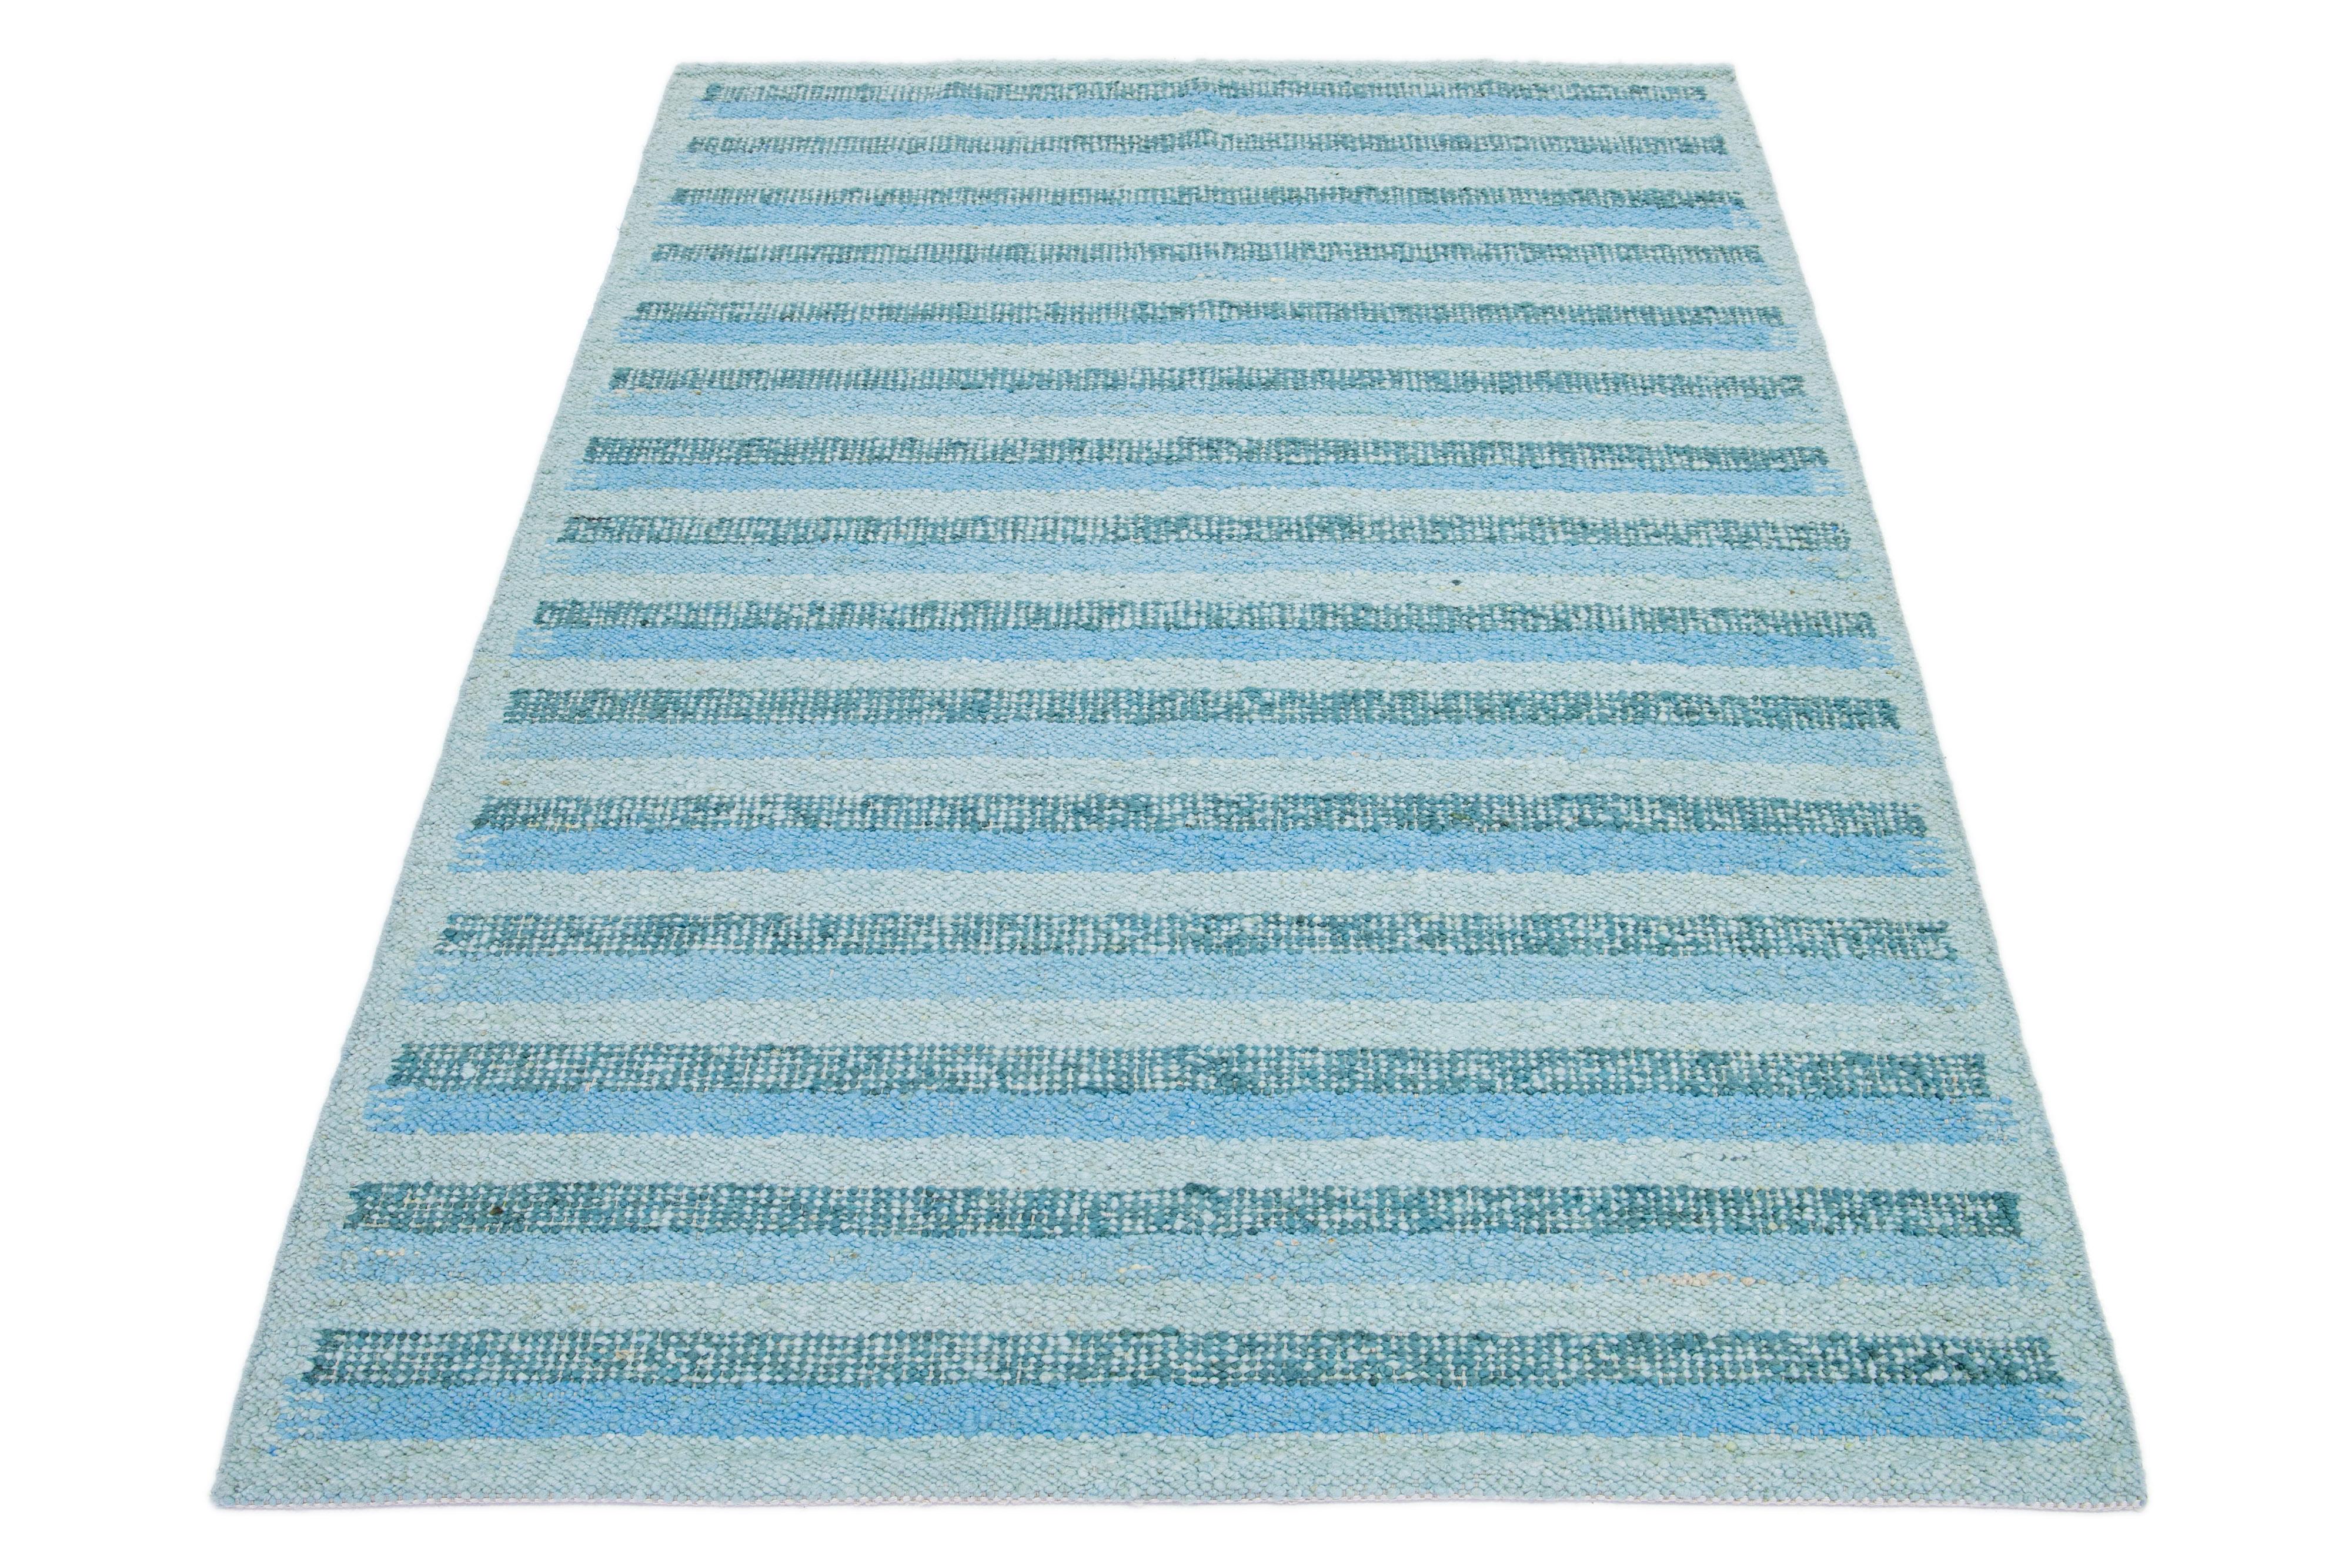 This flatweave rug features a chic contemporary Swedish design with a green field color. It has a striped pattern throughout the rug in light blue shades.

 This rug measures 6'2